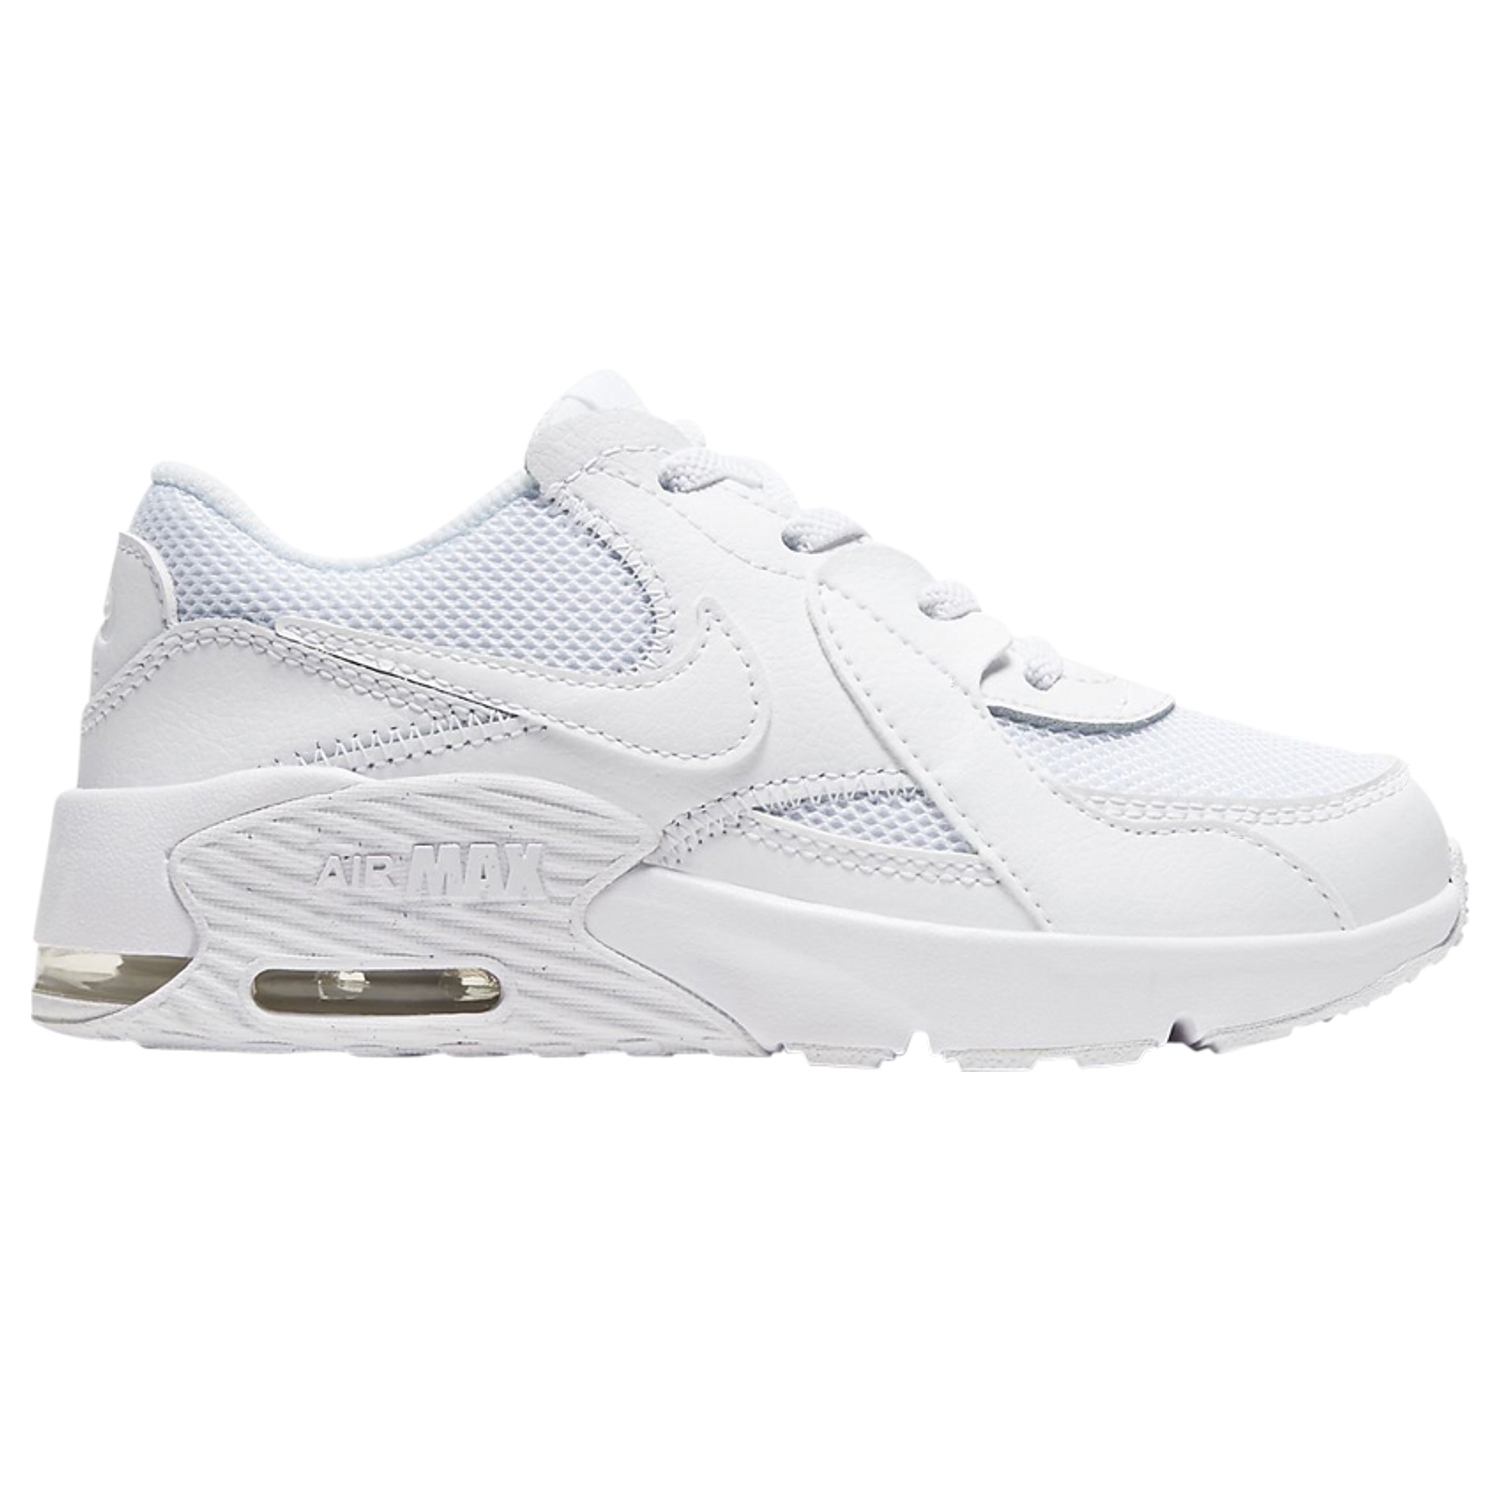 Кроссовки Nike Air Max Excee PS 'Triple White', Белый кроссовки nike air max excee белый черный